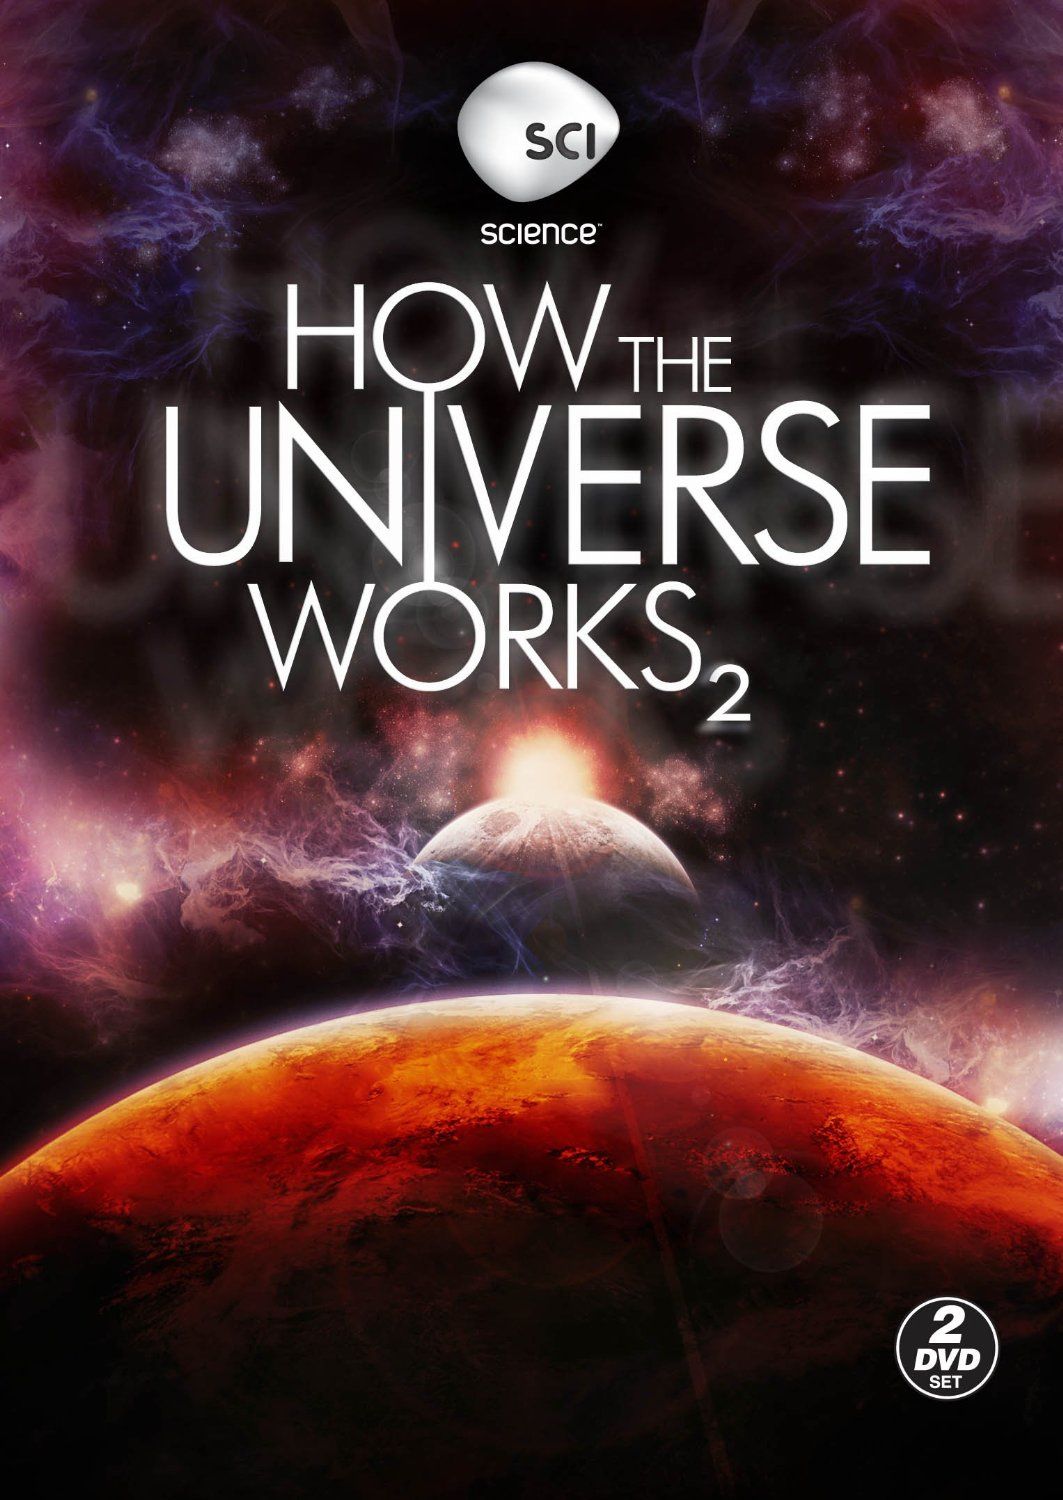 How the Universe Works: Expanded Edition ne zaman